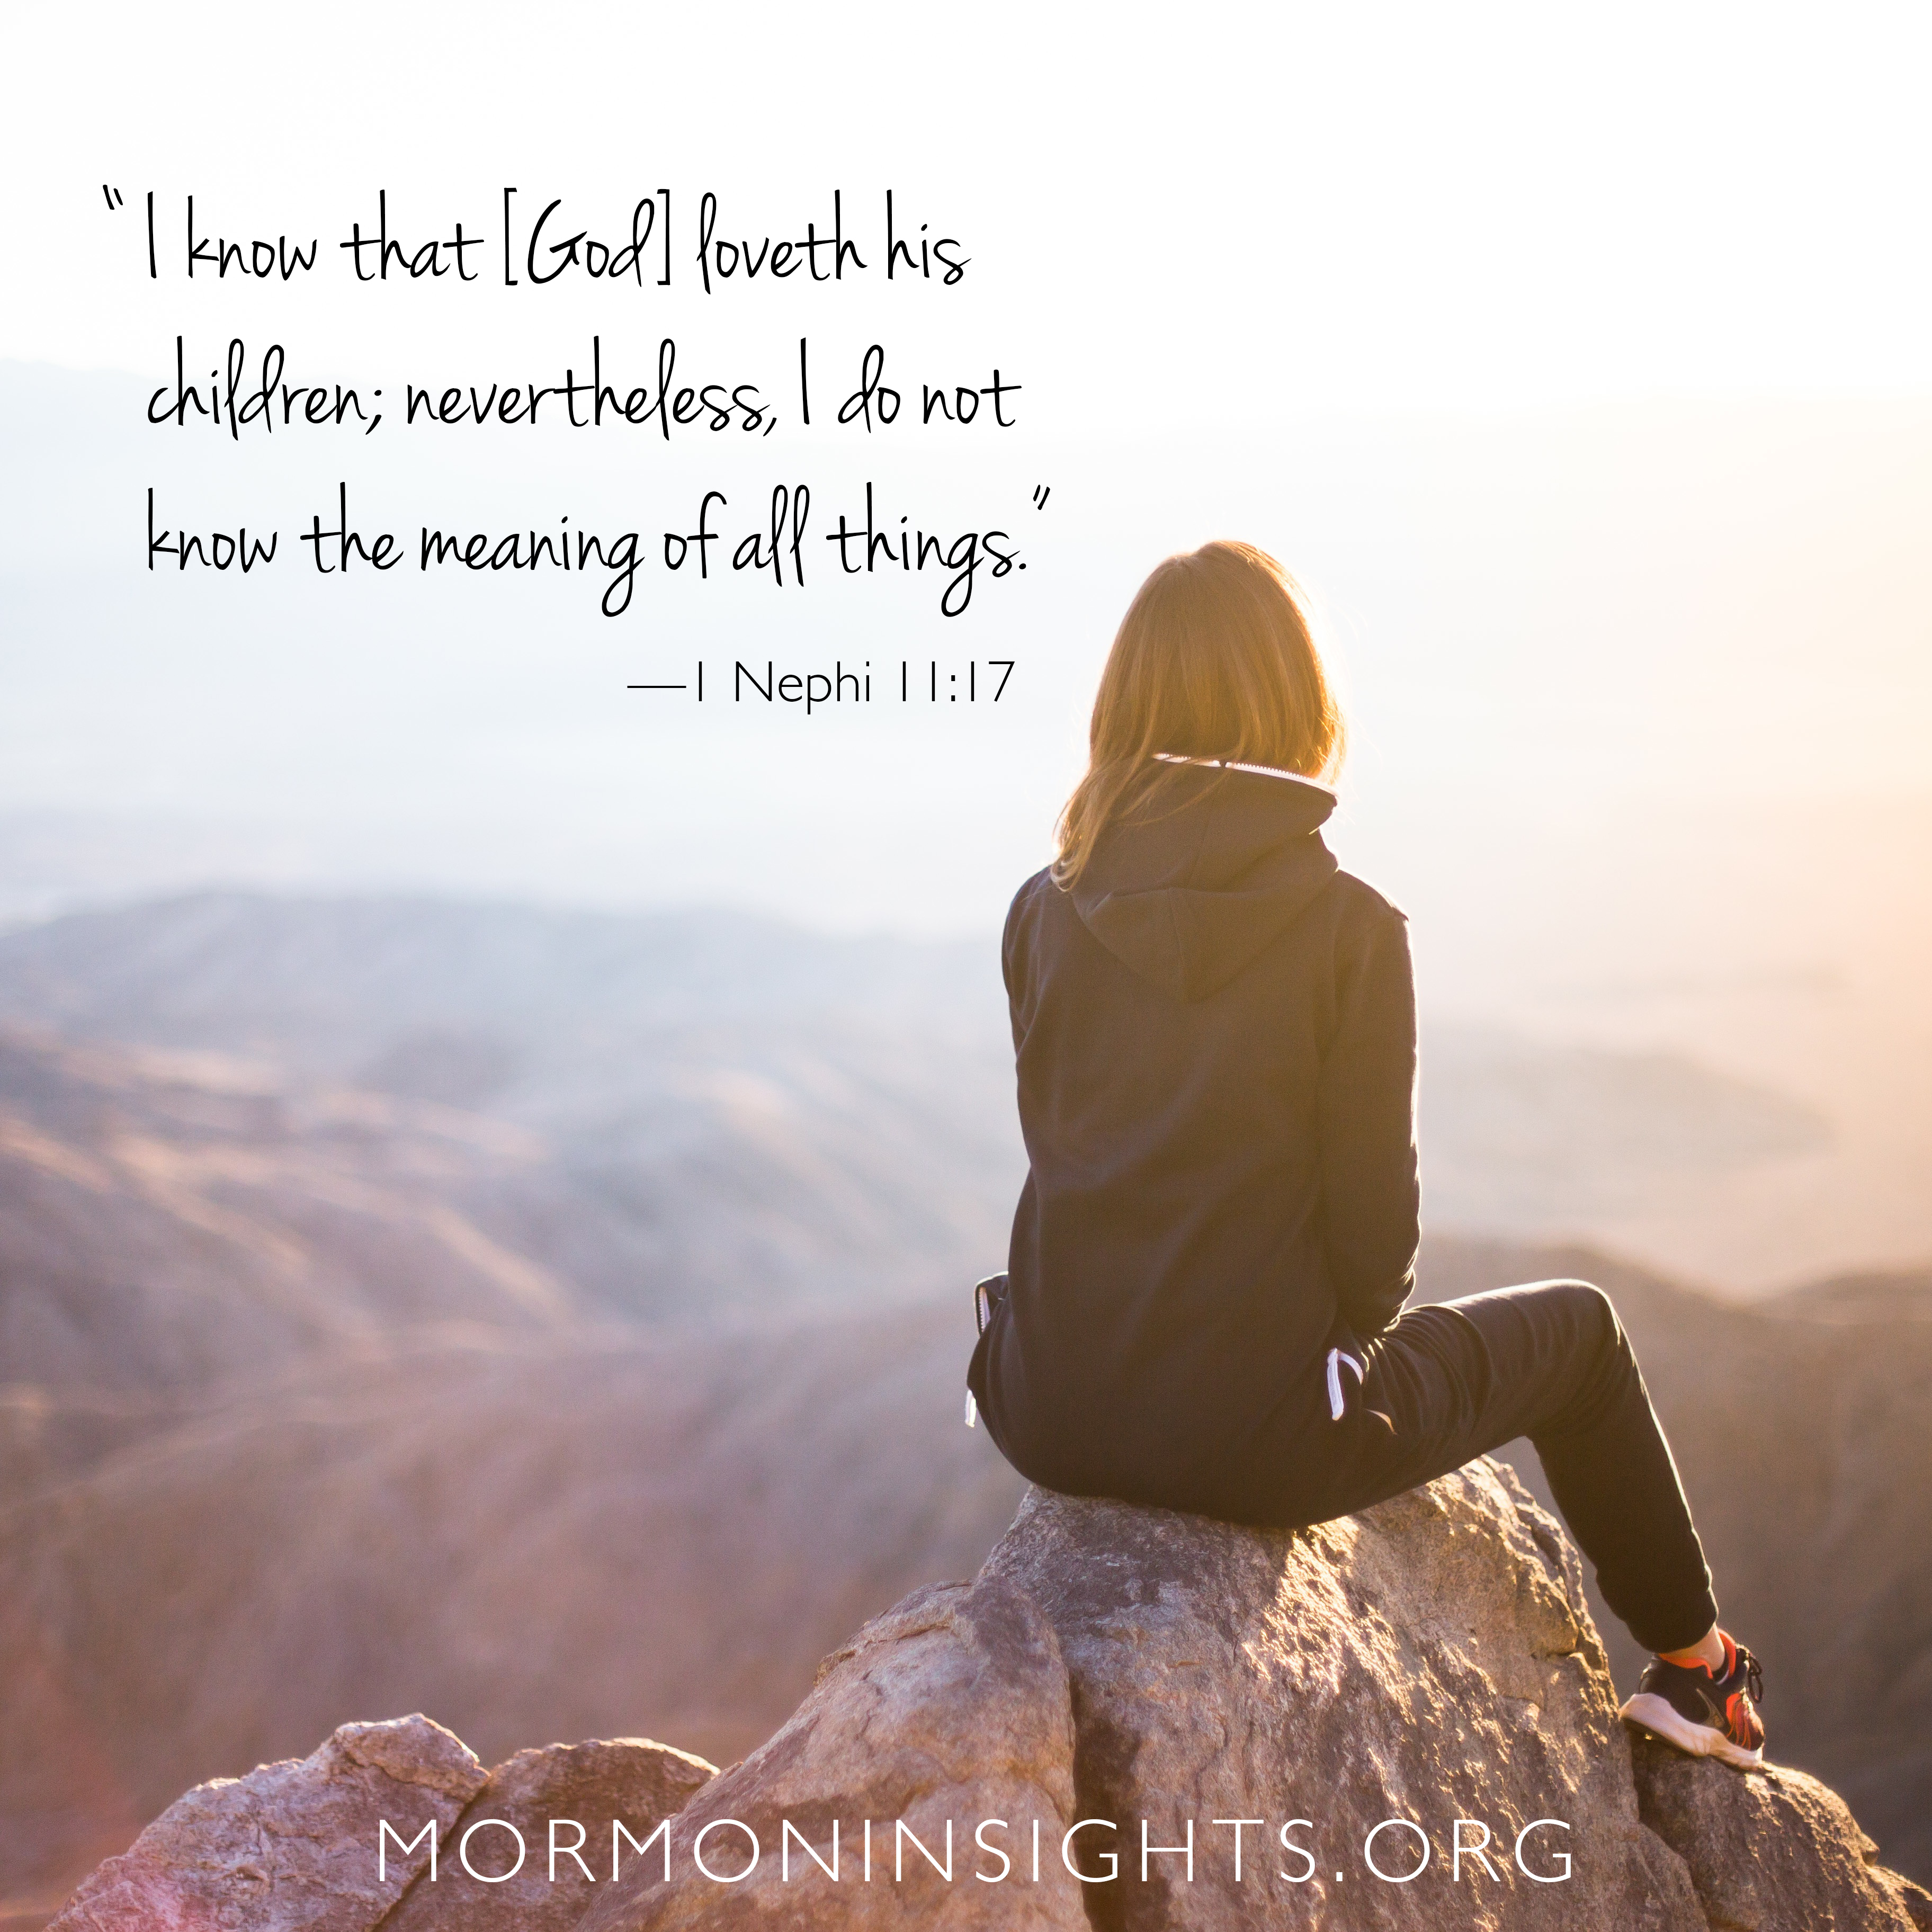 "I know that [God] loveth his children; nevertheless, I do not know the meaning of all things." -1 Nephi 1:17